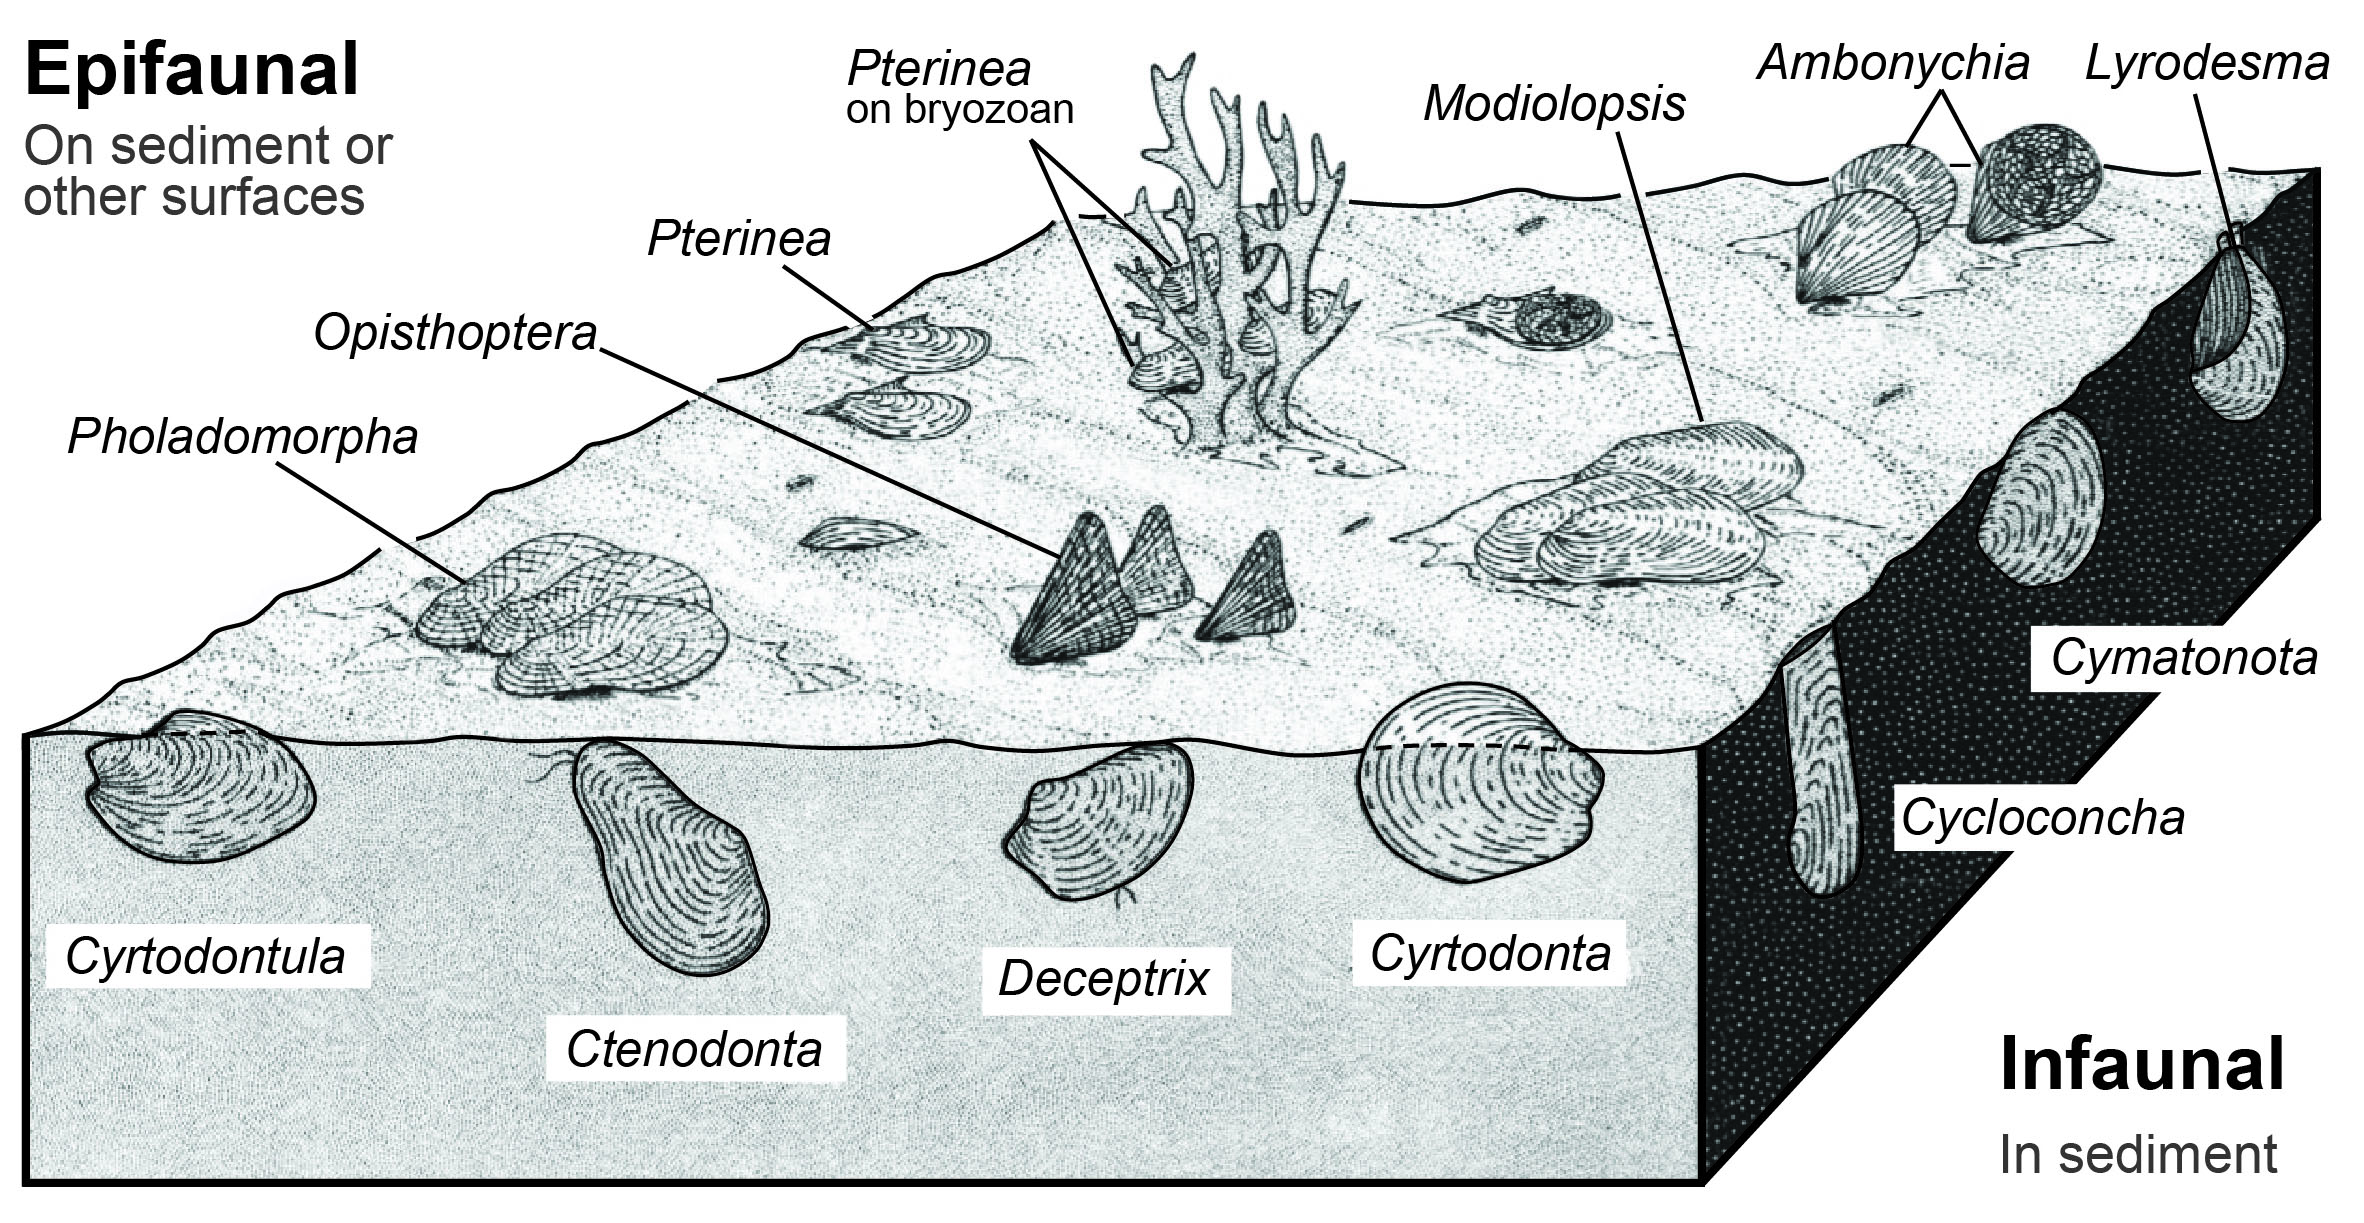 Infaunal, semi-infaunal, and epifaunal lifestyles interpreted for some Late Ordovician bivalve fossils found in Kentucky (modified from Pojeta, 1971, Fig. 9, p. 33). Modiolodon may have had an epifaunal lifestyle like Modiolopsis and attached to the substrate or other objects with byssal threads.